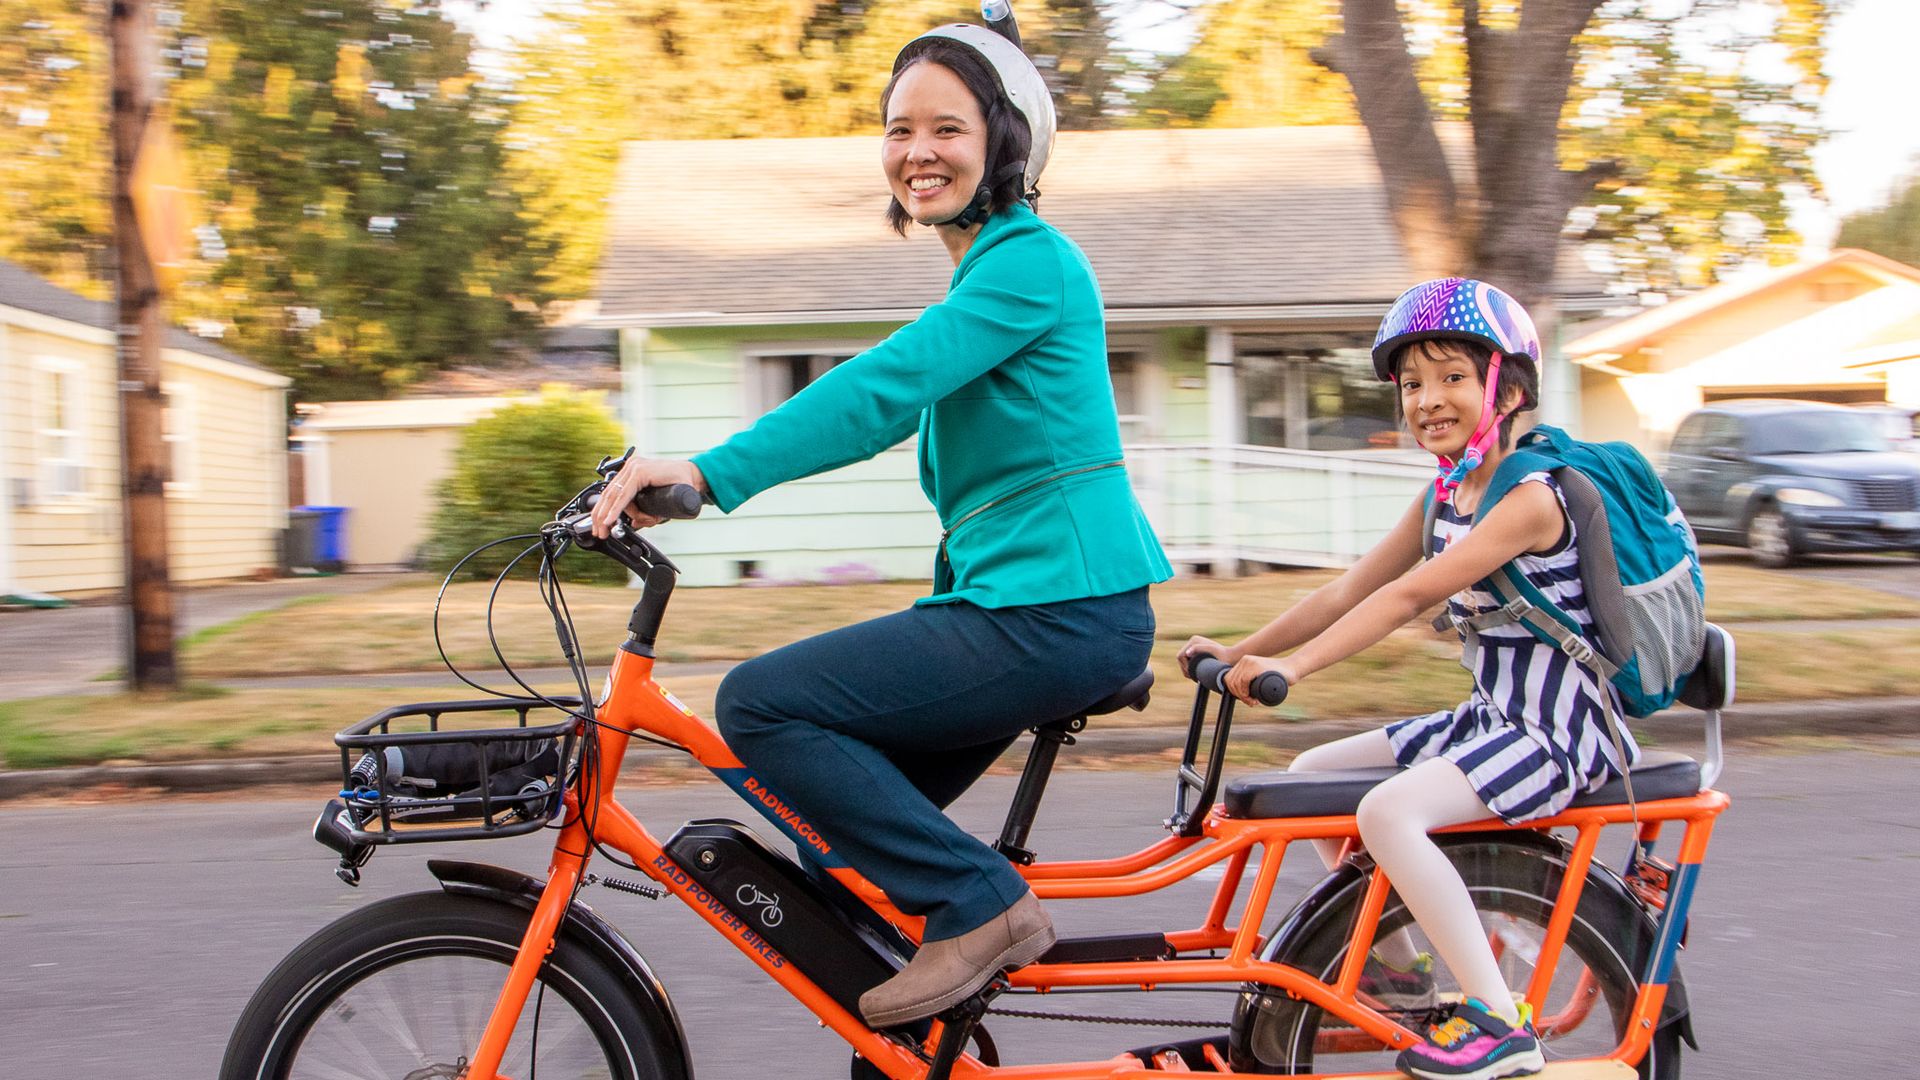 A woman riding a bright orange, long bike, with a child wearing a backpack on the extender seat in the rear.